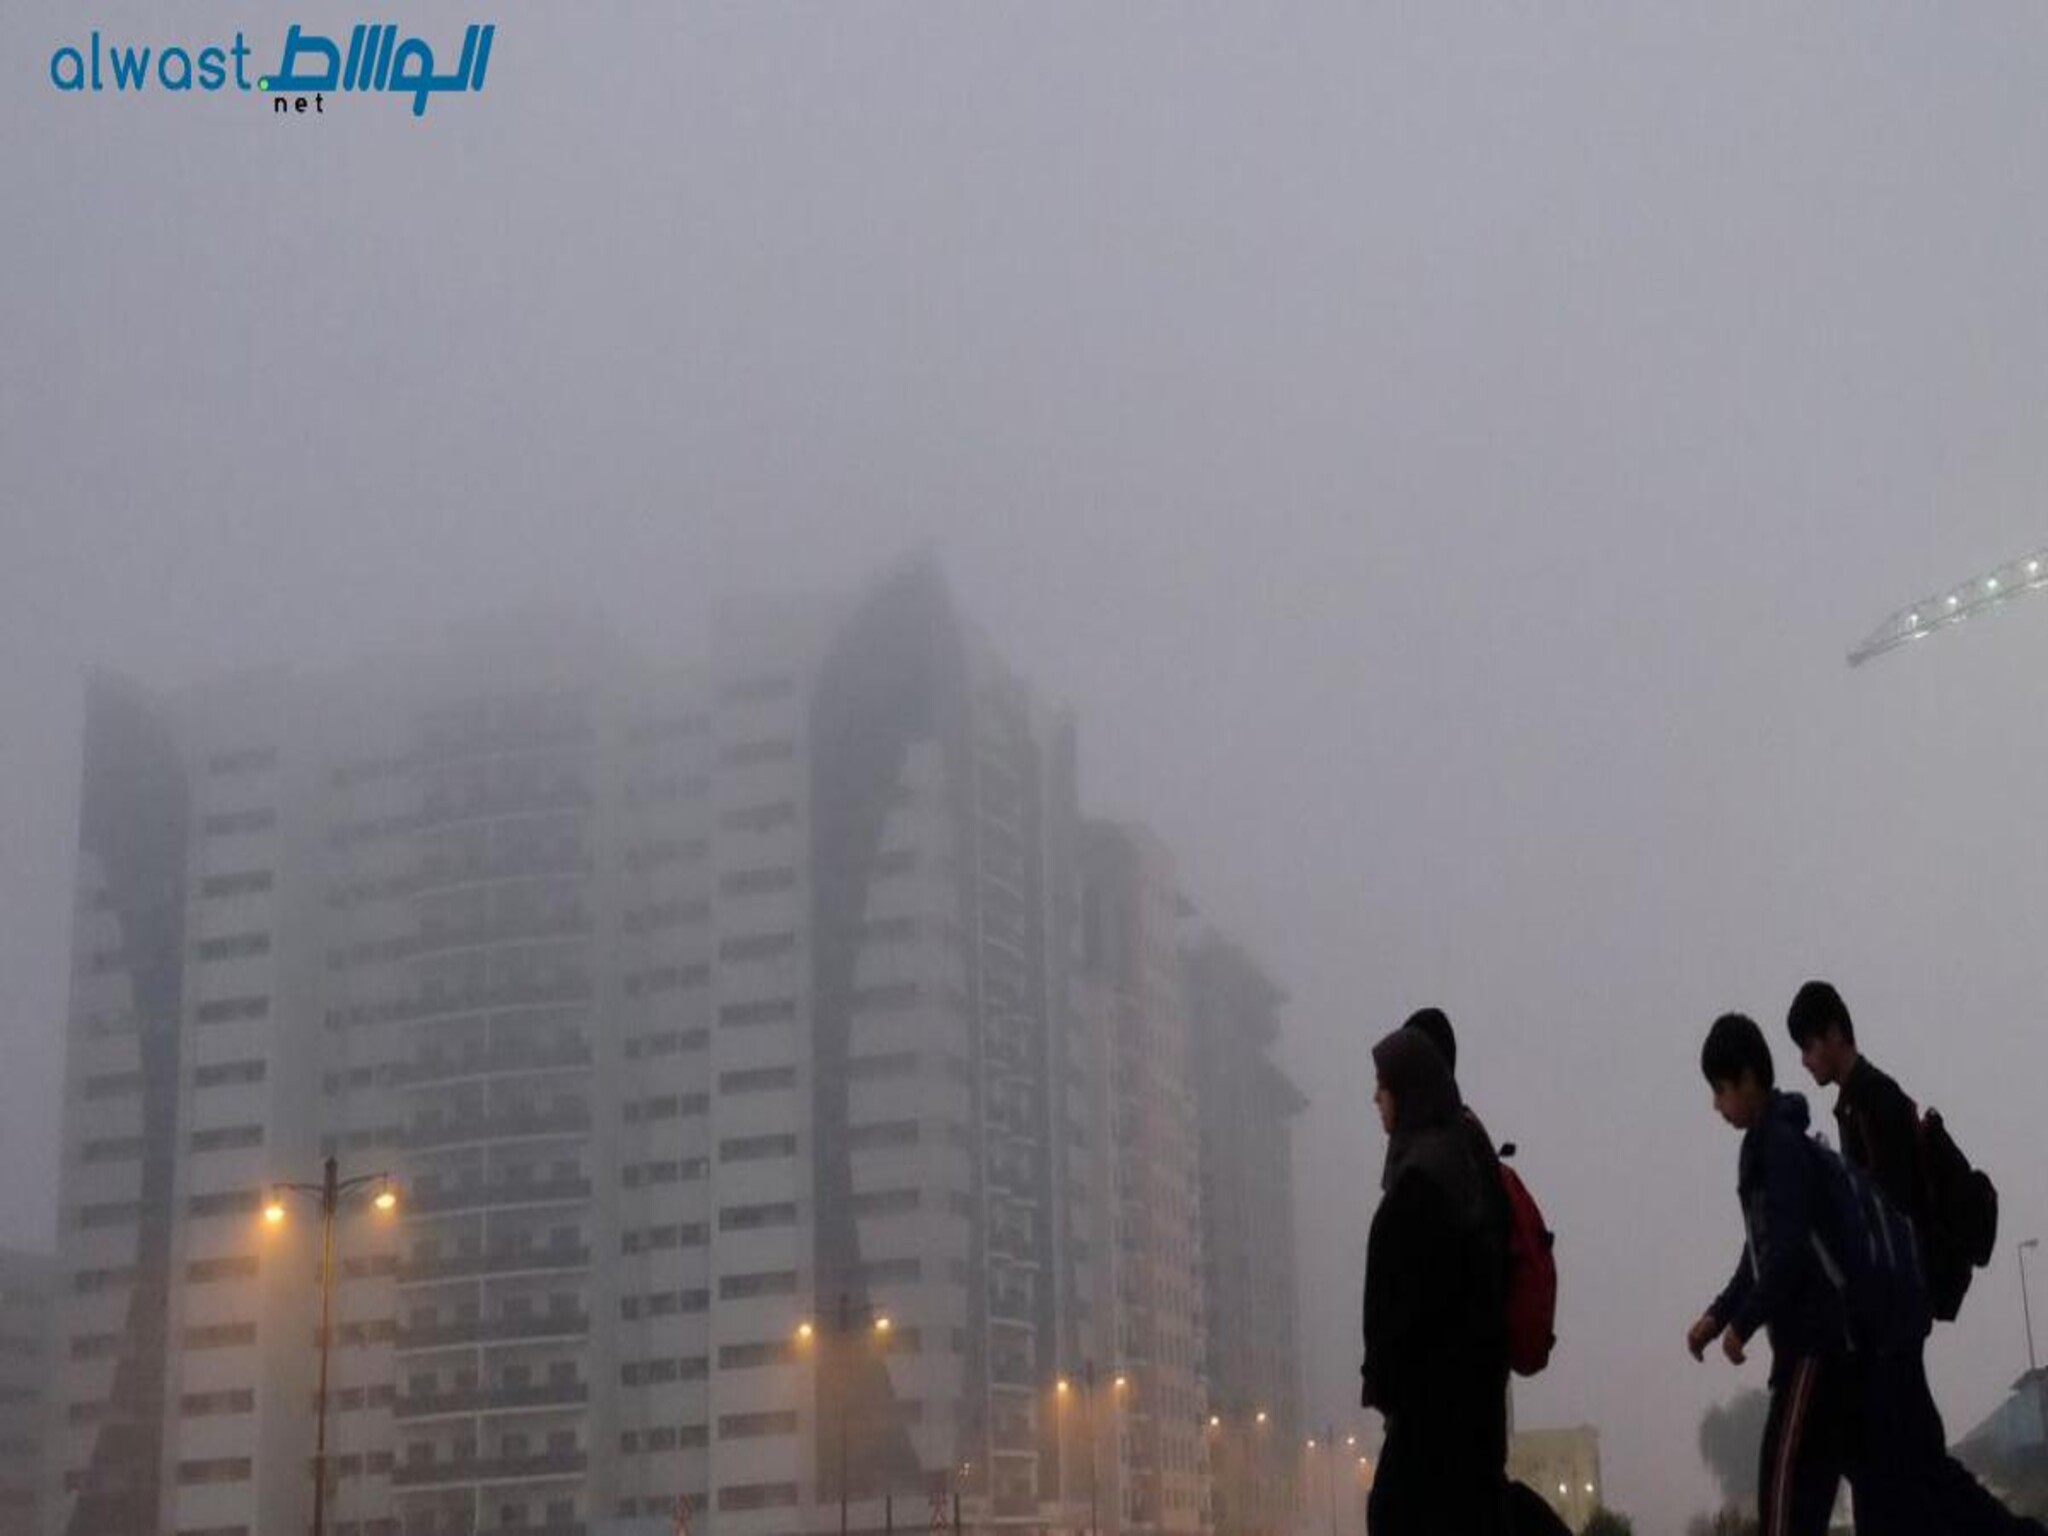 UAE issues a weather alert for fog caution is urged about reduced visibility